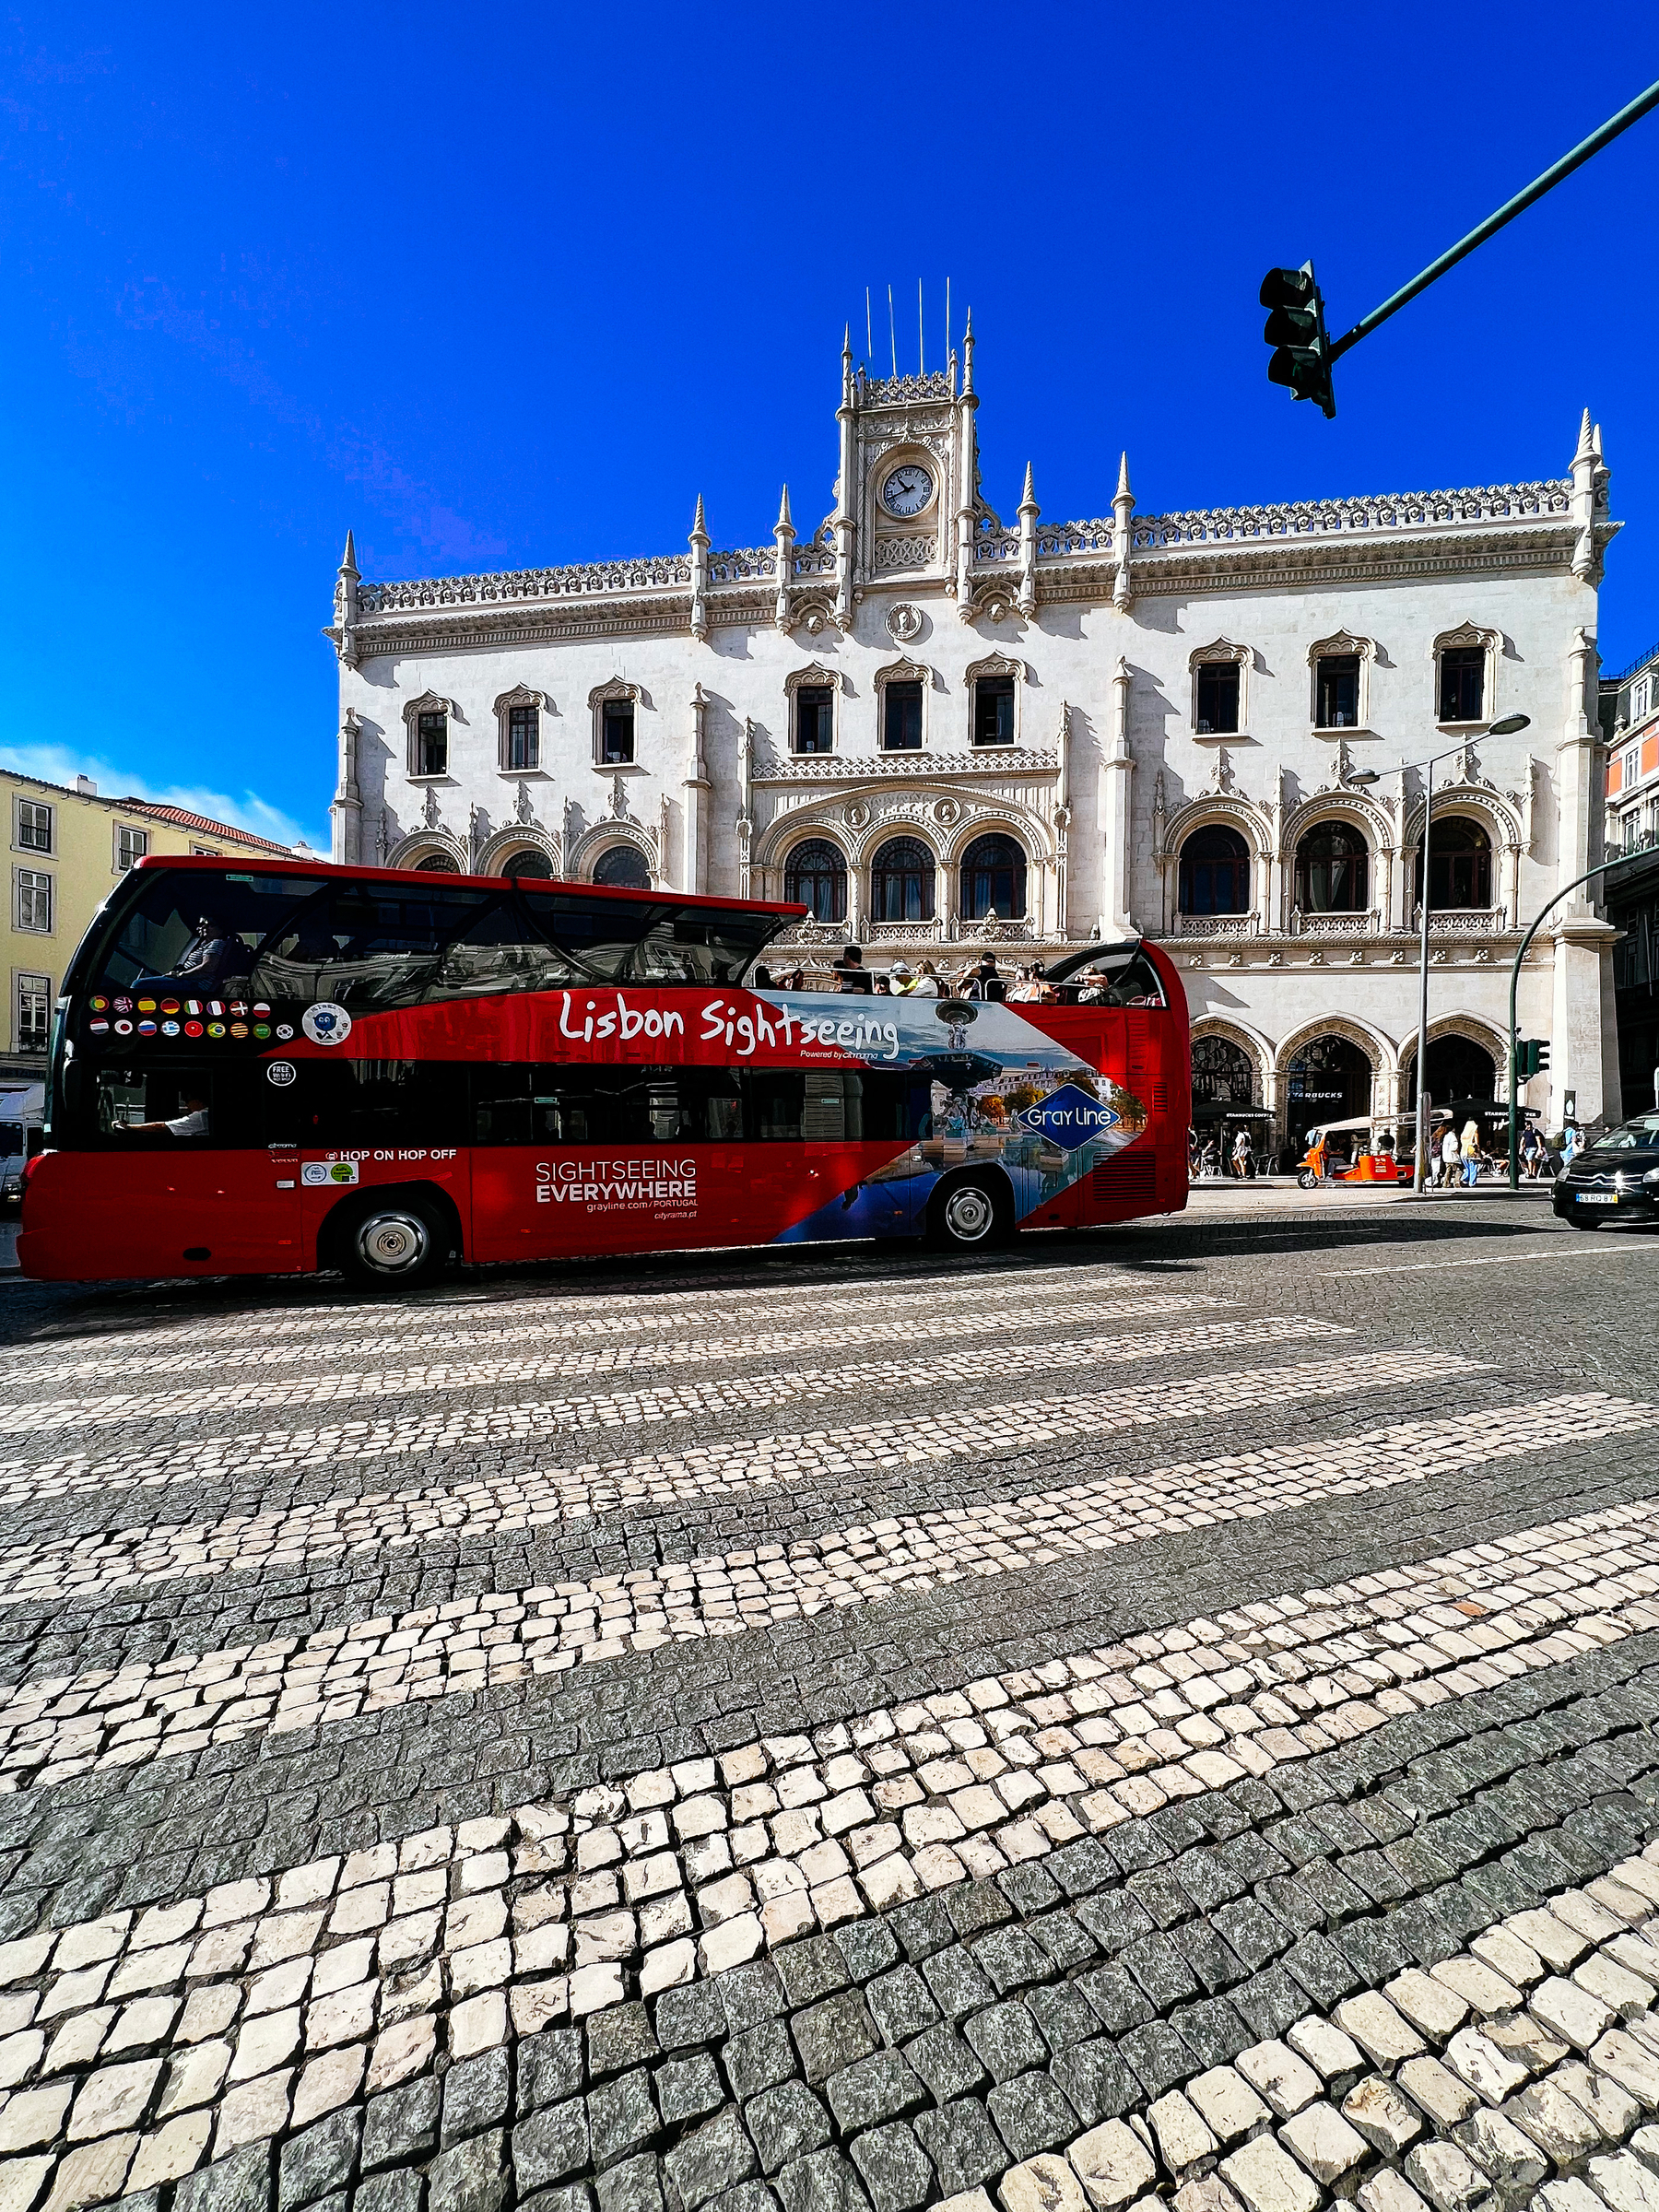 A red bus with “Lisbon sightseeing” written on it, in front of a cool, old, building. 